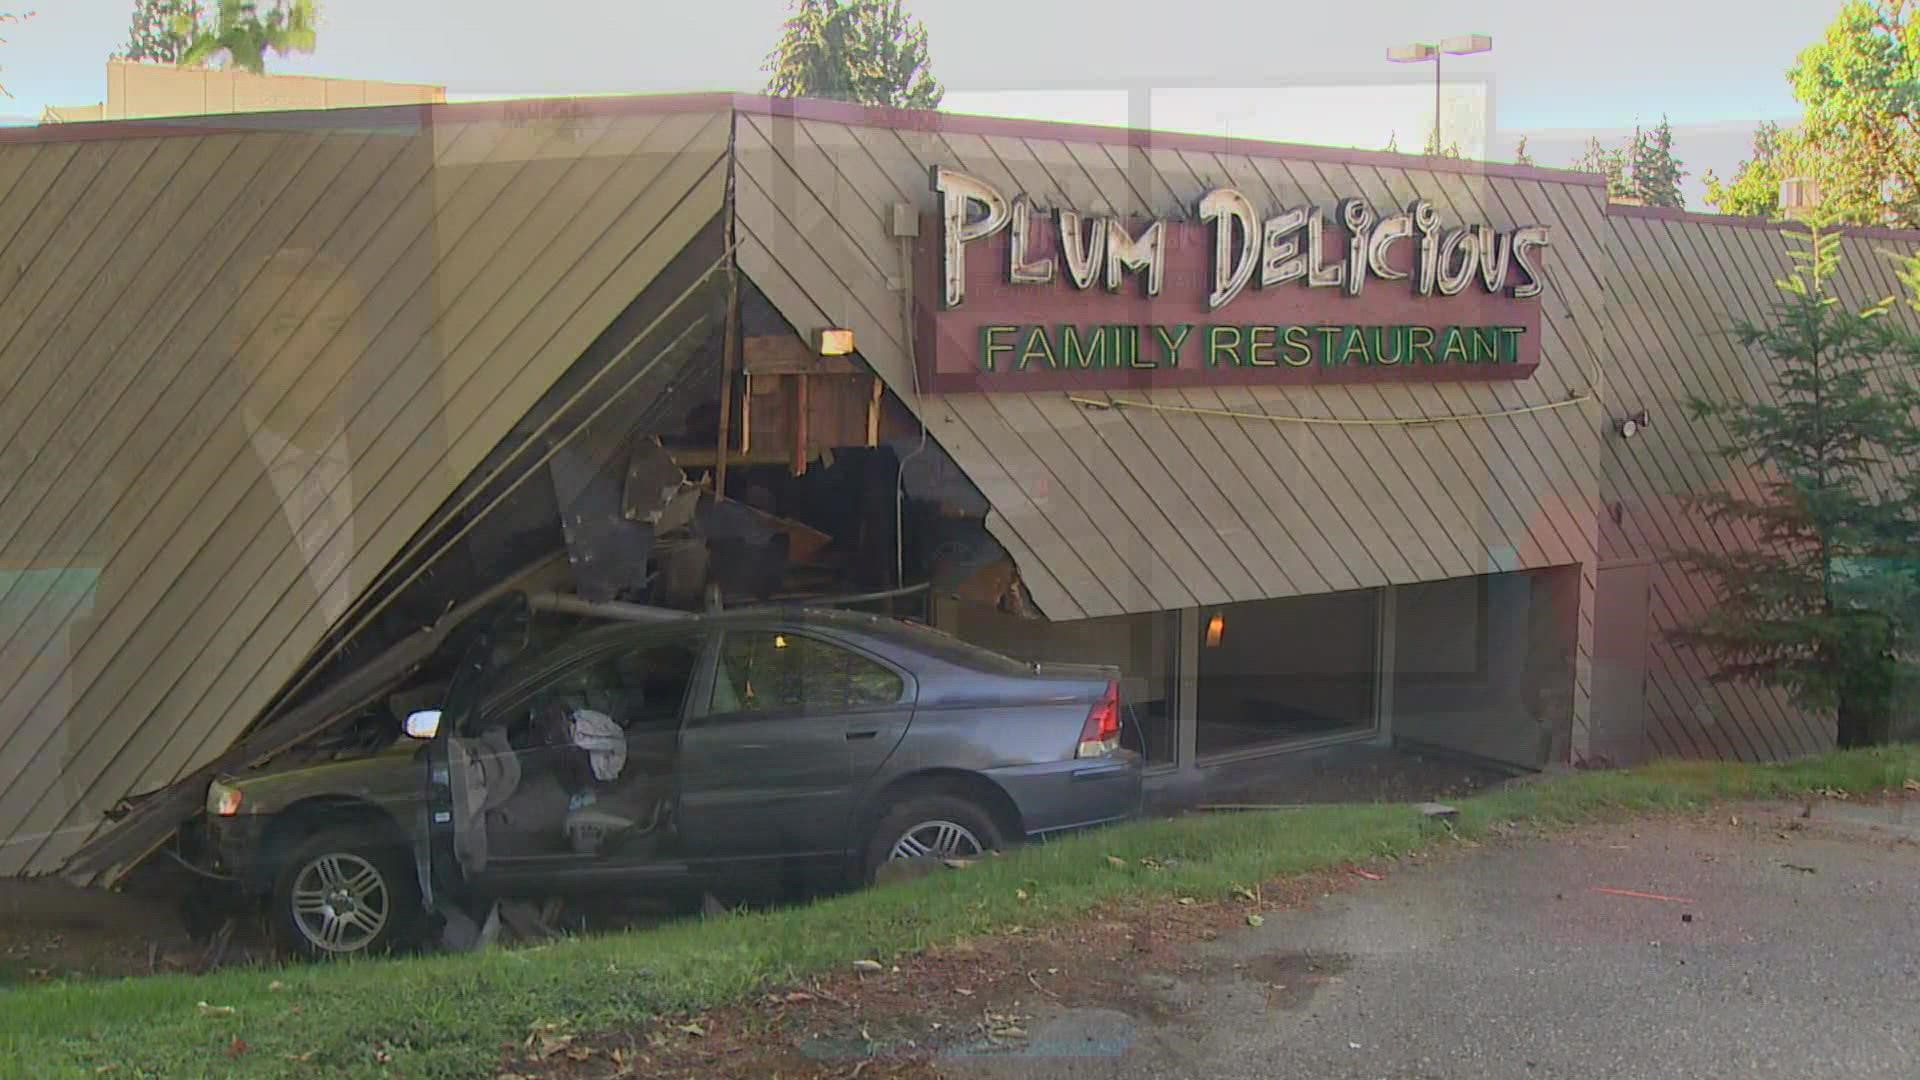 The crash was reported at a Plum Delicious restaurant in Renton, according to the Renton Police Department.